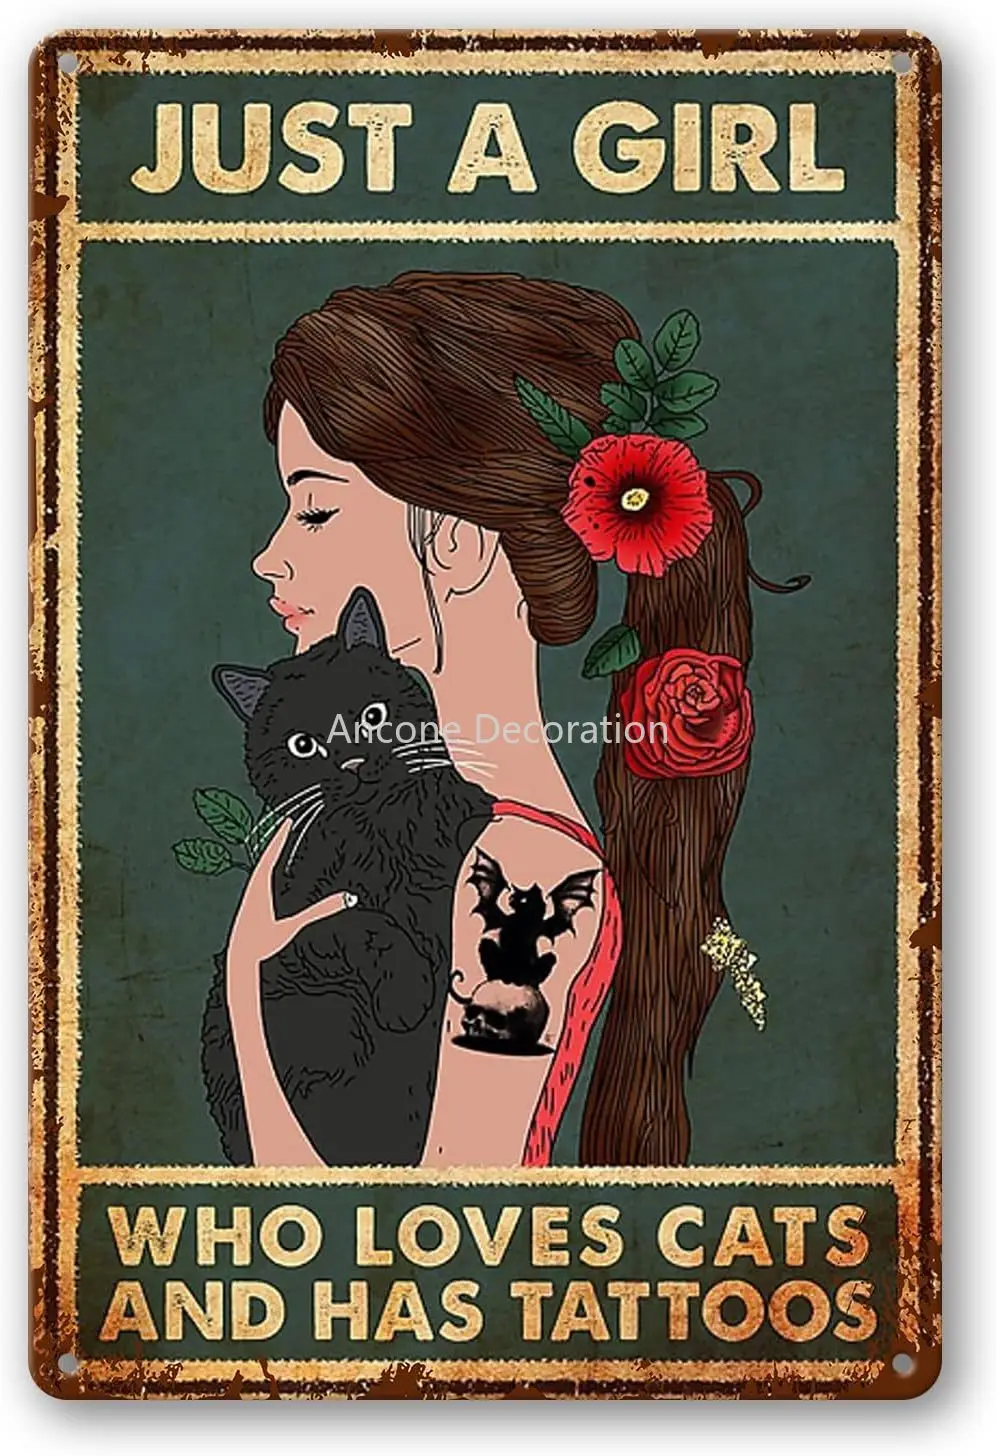 

Just A Girl Who Loves Cats and Has Tattoos, Metal Tin Sign Vintage Chic Art Decoration for Home Bar Cafe Farm Store 8 x